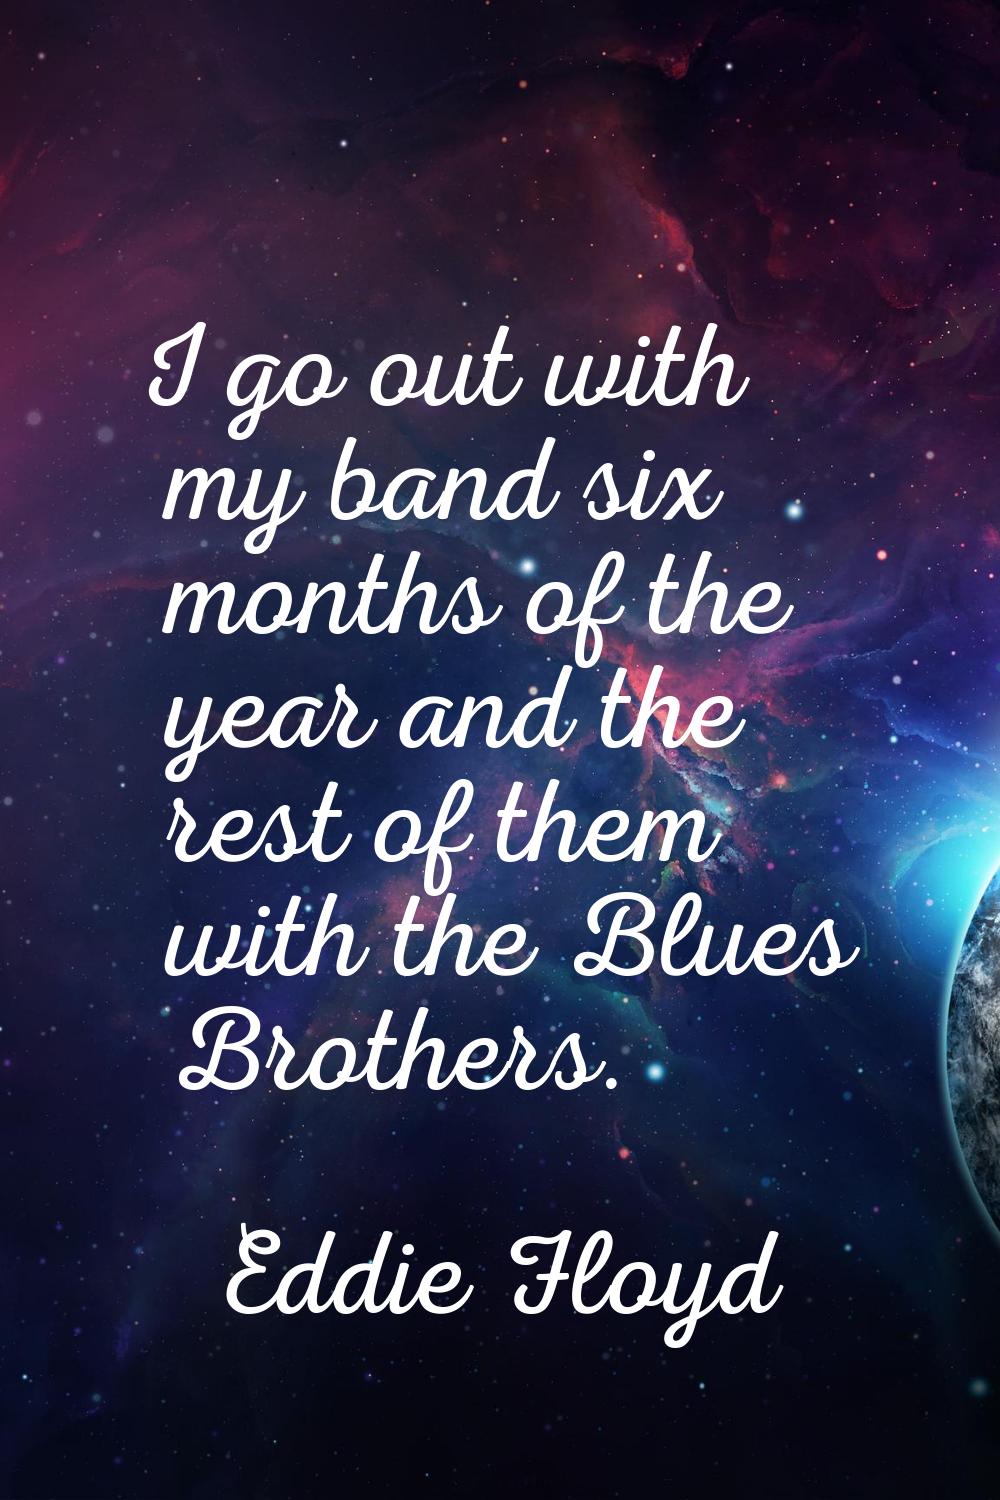 I go out with my band six months of the year and the rest of them with the Blues Brothers.